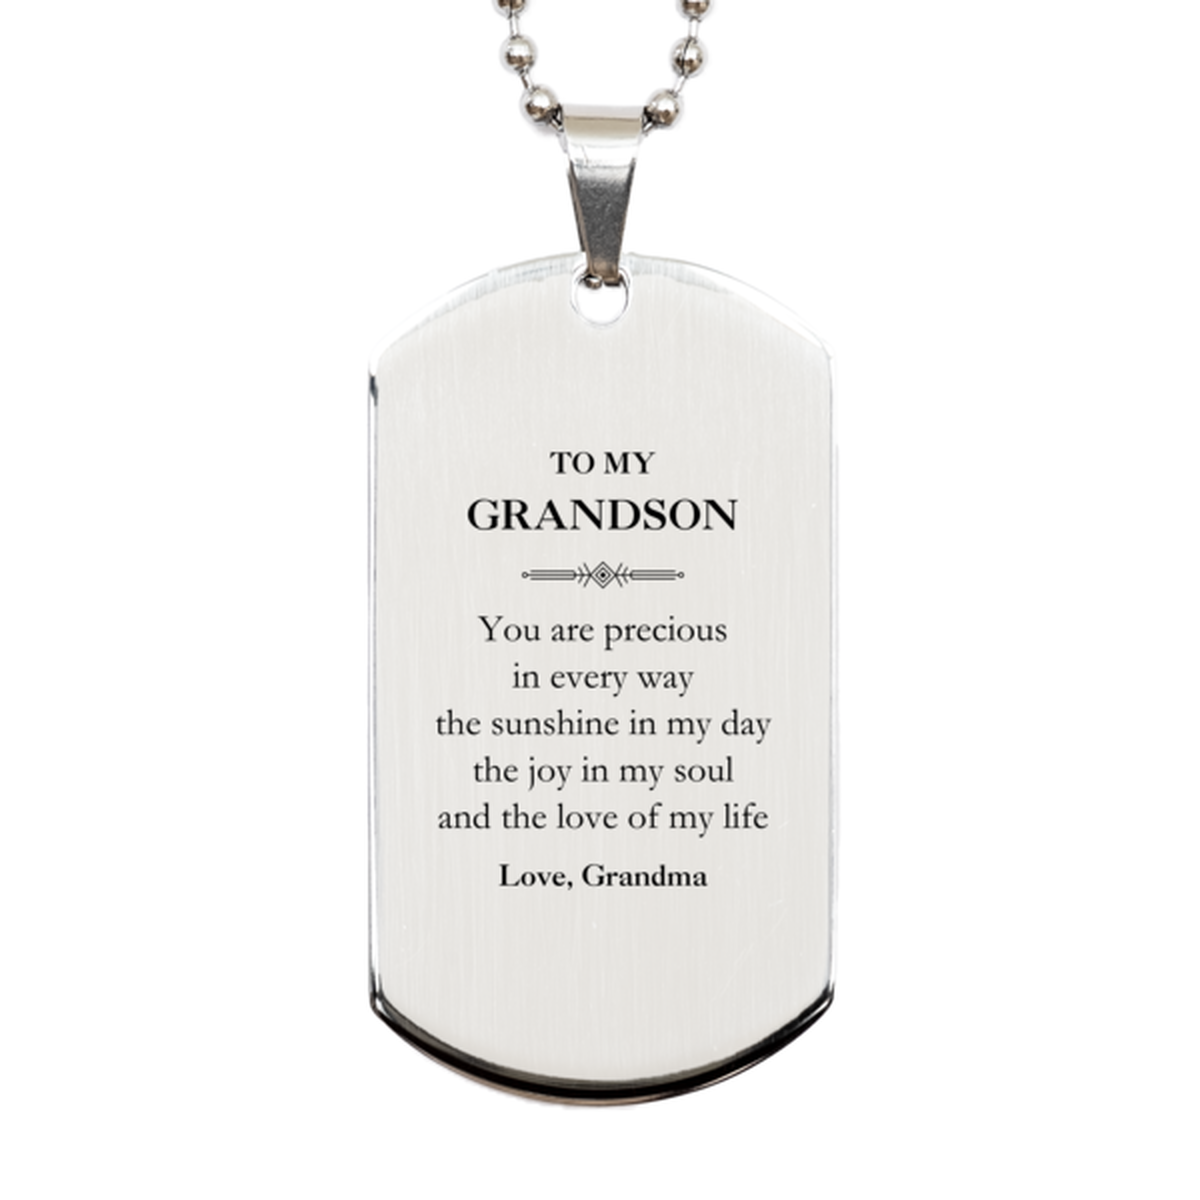 Graduation Gifts for Grandson Silver Dog Tag Present from Grandma, Christmas Grandson Birthday Gifts Grandson You are precious in every way the sunshine in my day. Love, Grandma